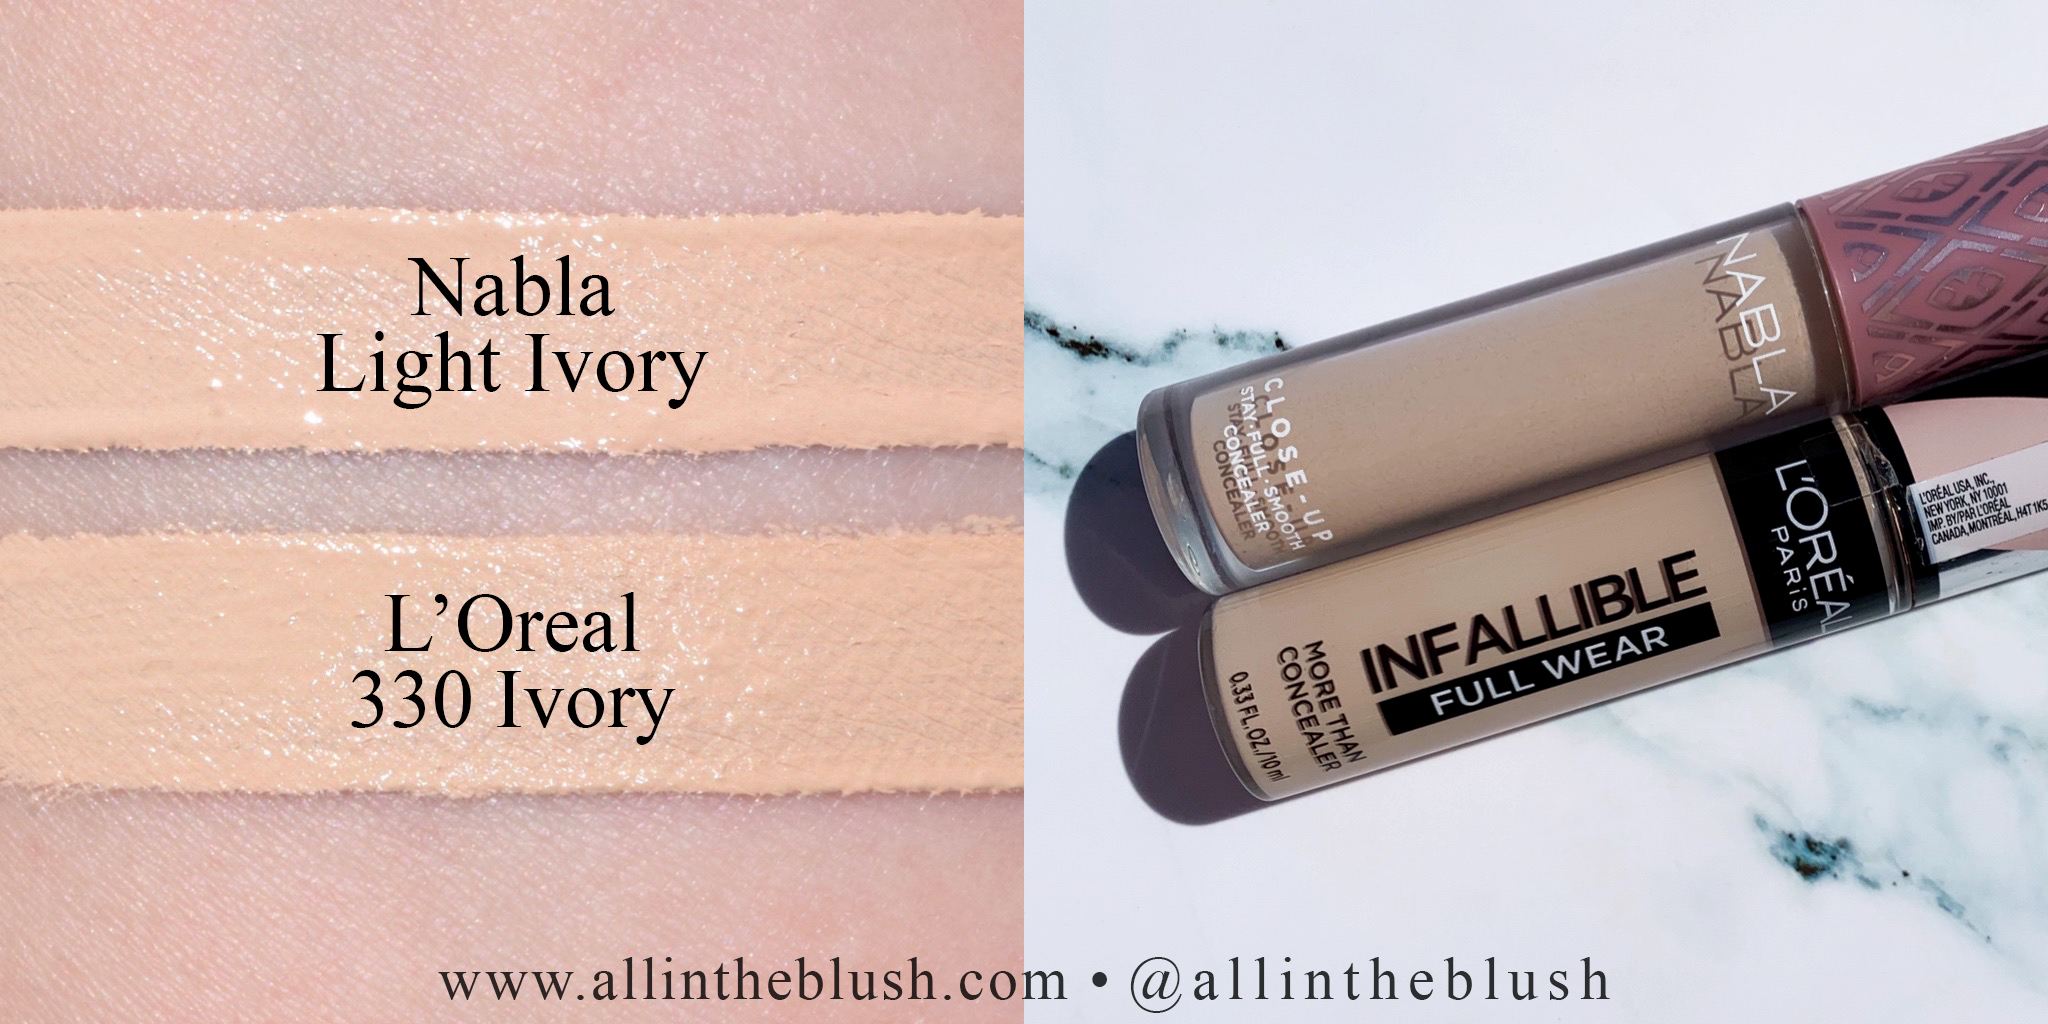 Swatch - Nabla Cosmetics Light Ivory Concealer and L'Oreal 330 Ivory Concealer